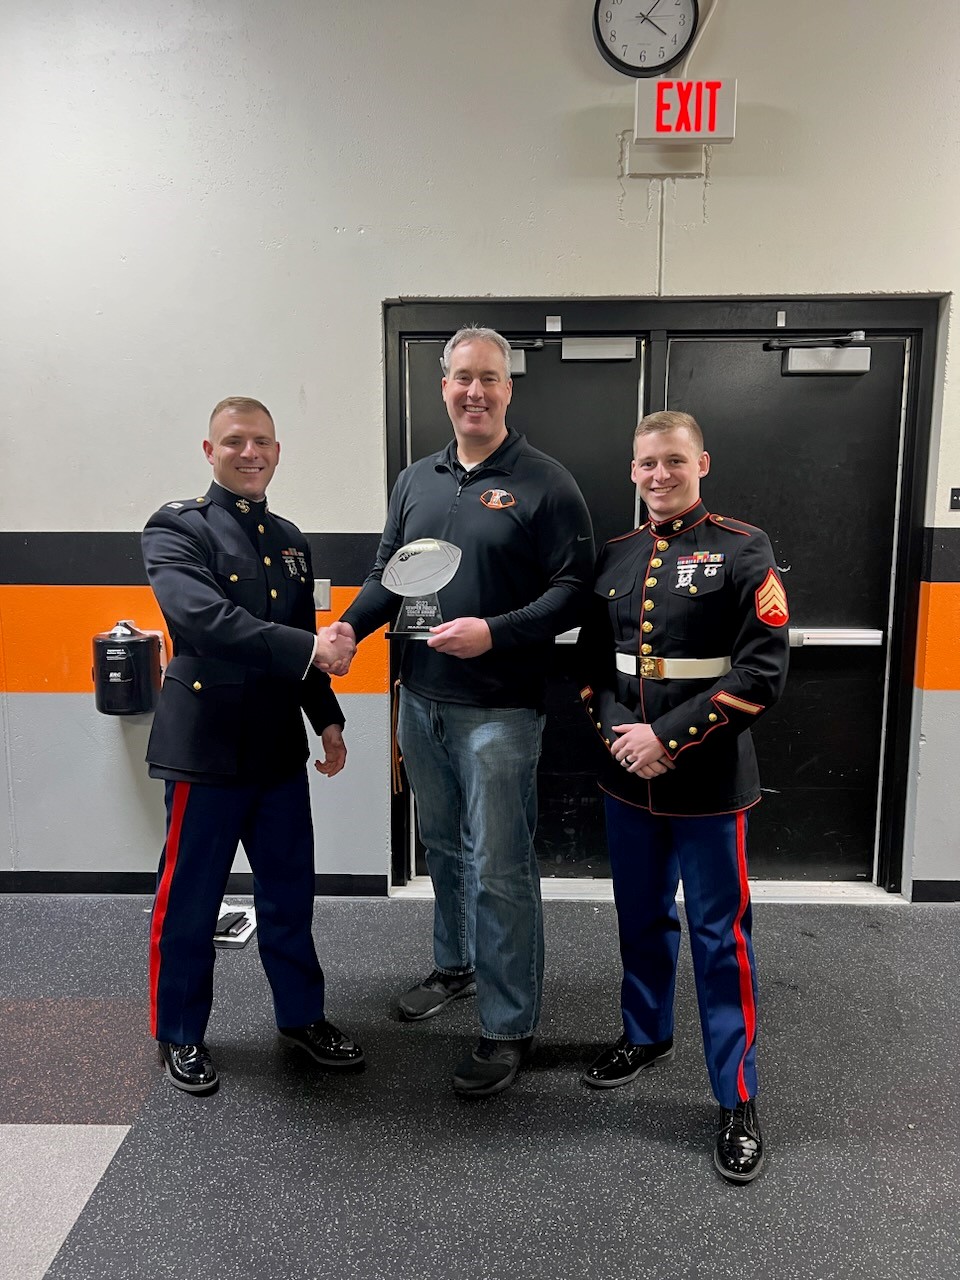 Matt Binsfeld, head football coach and guidance counselor at Kaukauna High School, is awarded the Semper Fi Coach Award by Marine recruiters with Recruiting Station (RS) Milwaukee at Kaukauna High School, Kaukauna, WI, Mar. 22, 2023. The Semper Fi Coach Award recognizes coaches who exemplify the Marine Corps motto of Semper Fidelis, and who model the Marine Corps values of honor, courage, and commitment. (U.S. Marine Corps photo provided by courtesy asset)